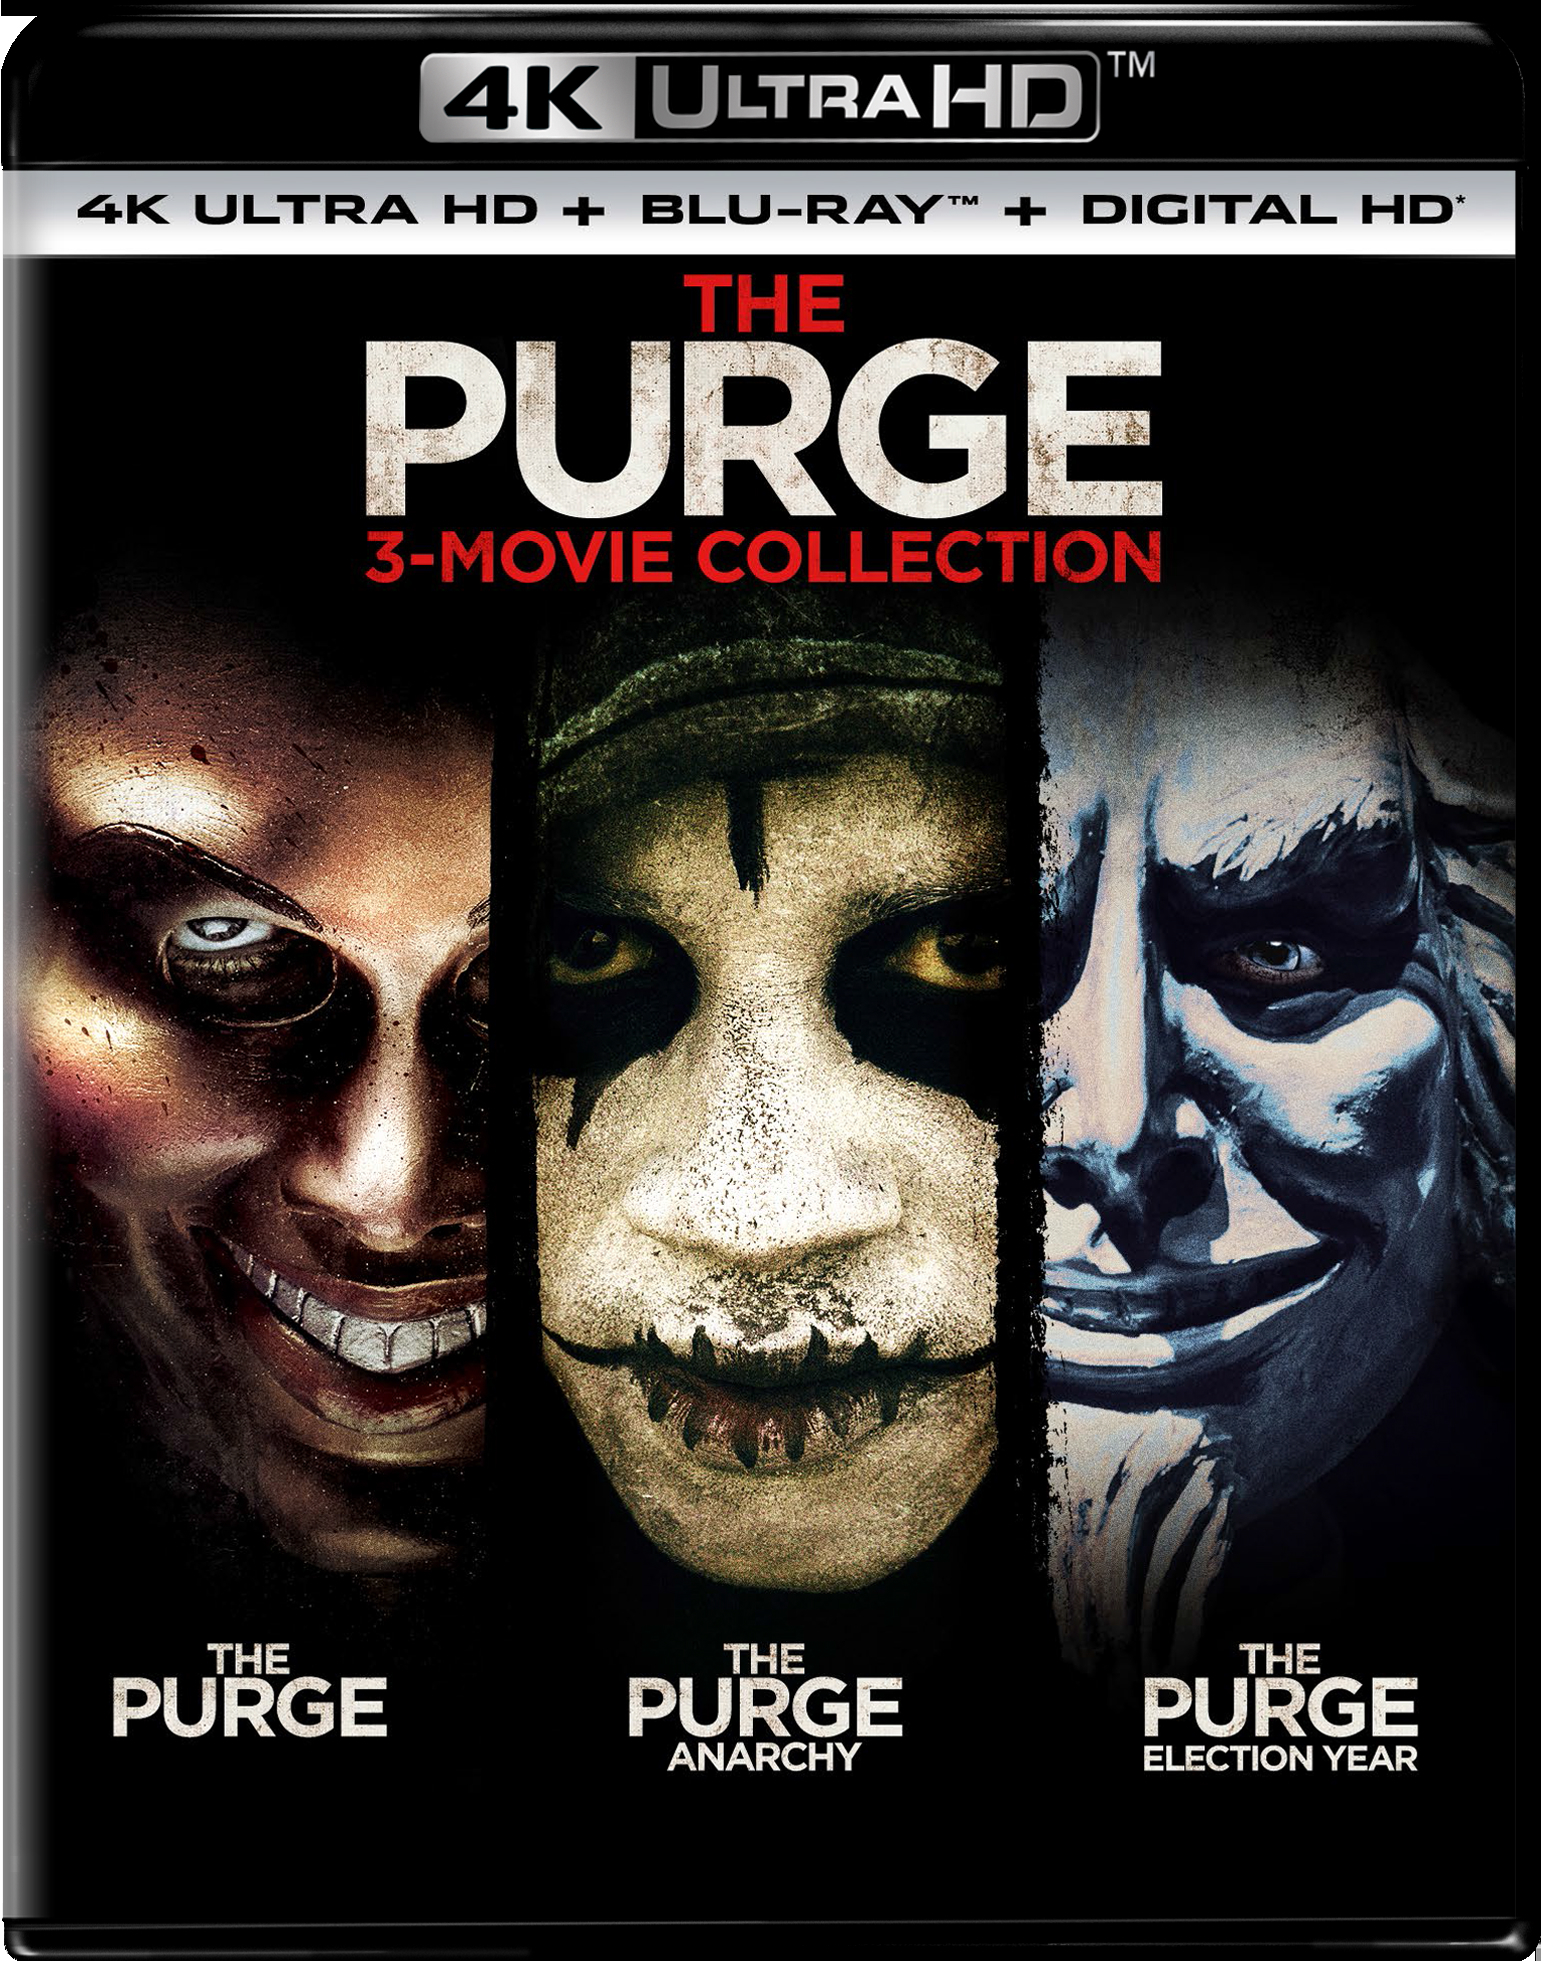 The Purge: 3-movie Collection (4K Ultra HD) - UHD [ 2016 ]  - Horror Movies On 4K Ultra HD Blu-ray - Movies On GRUV